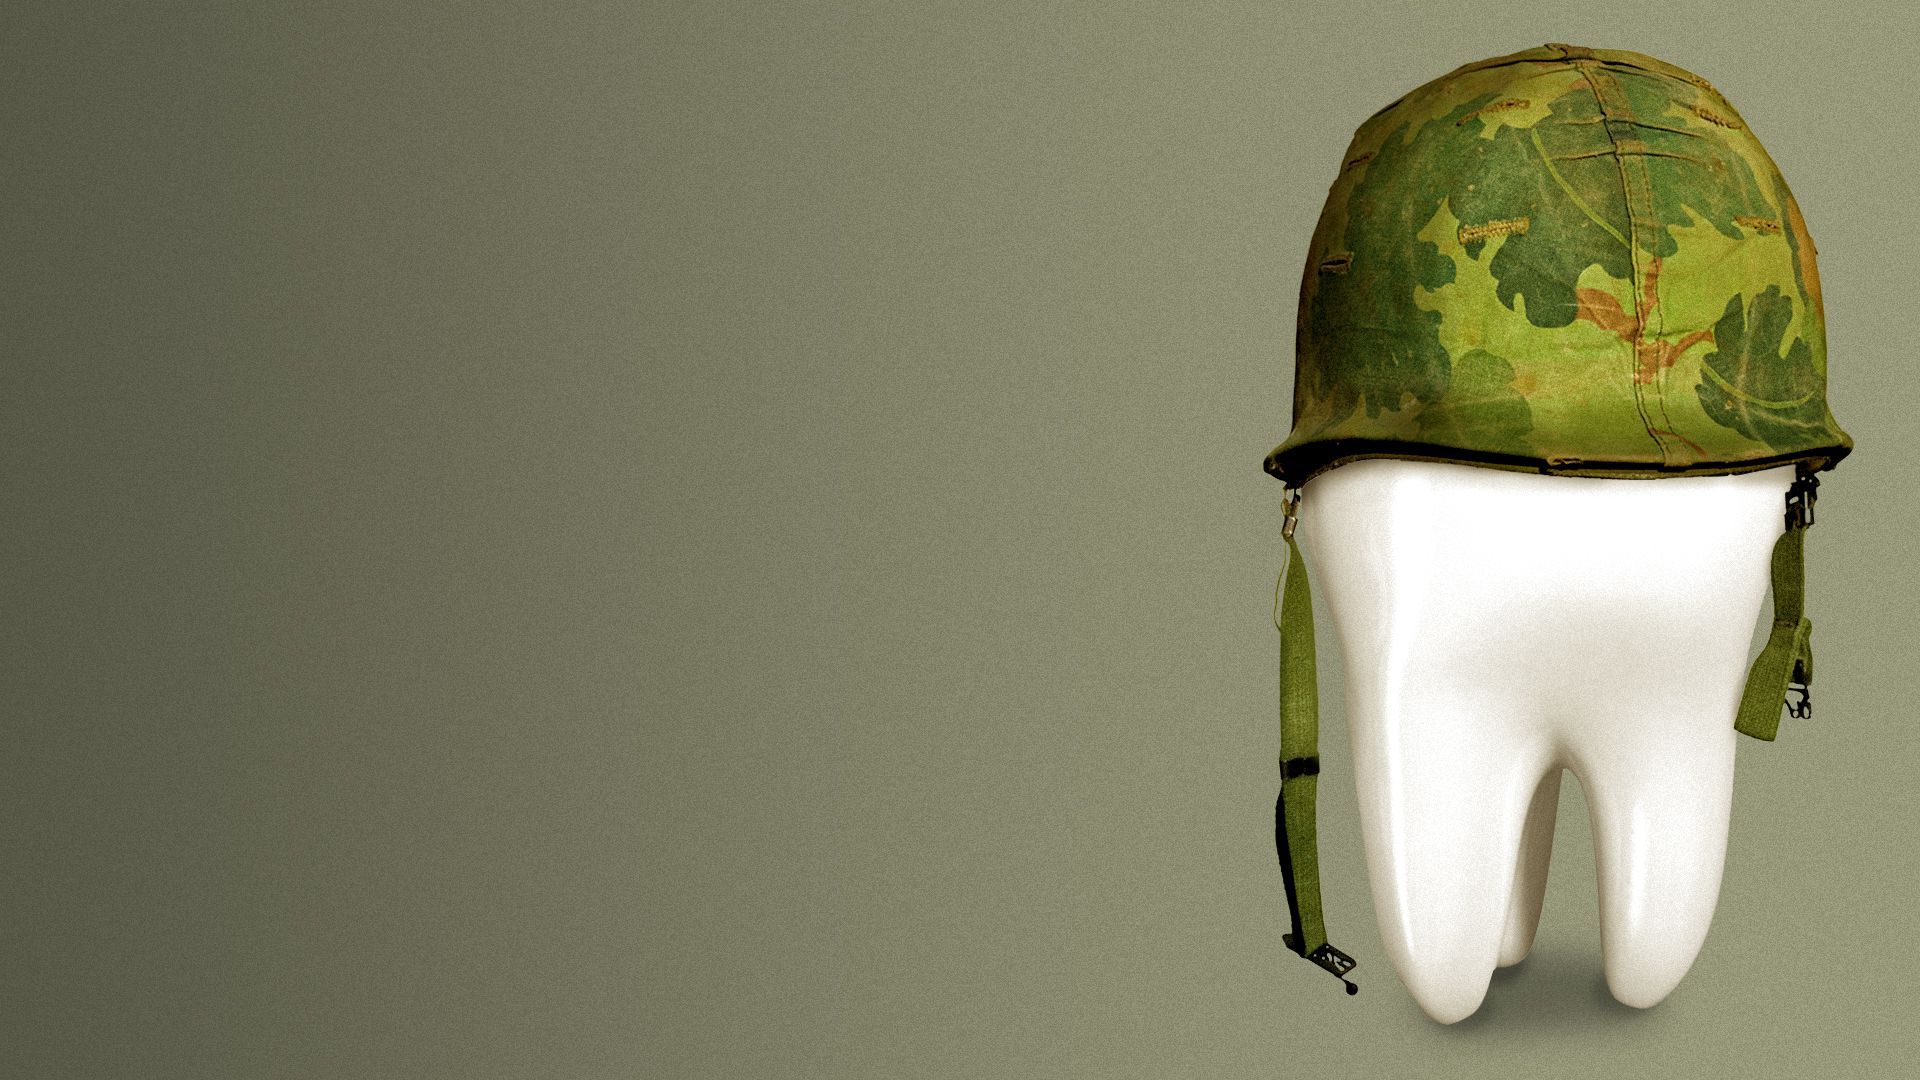 Illustration of a tooth wearing an army helmet.